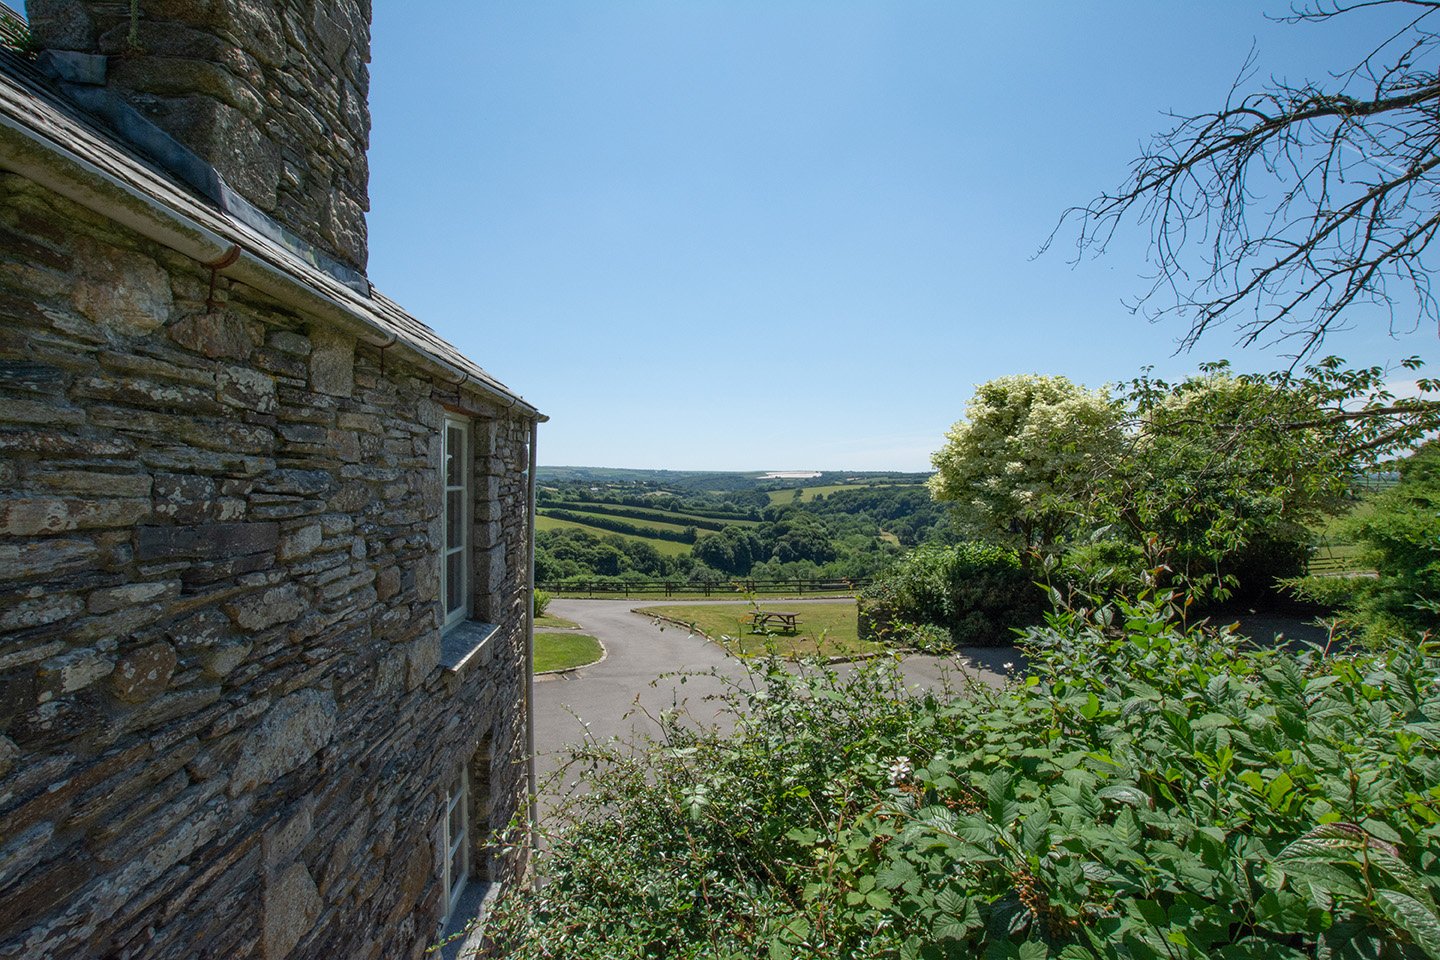 The view from the garden of Butterwell luxury self catering converted barn holiday cottage at Penrose Burden in North Cornwall.jpg